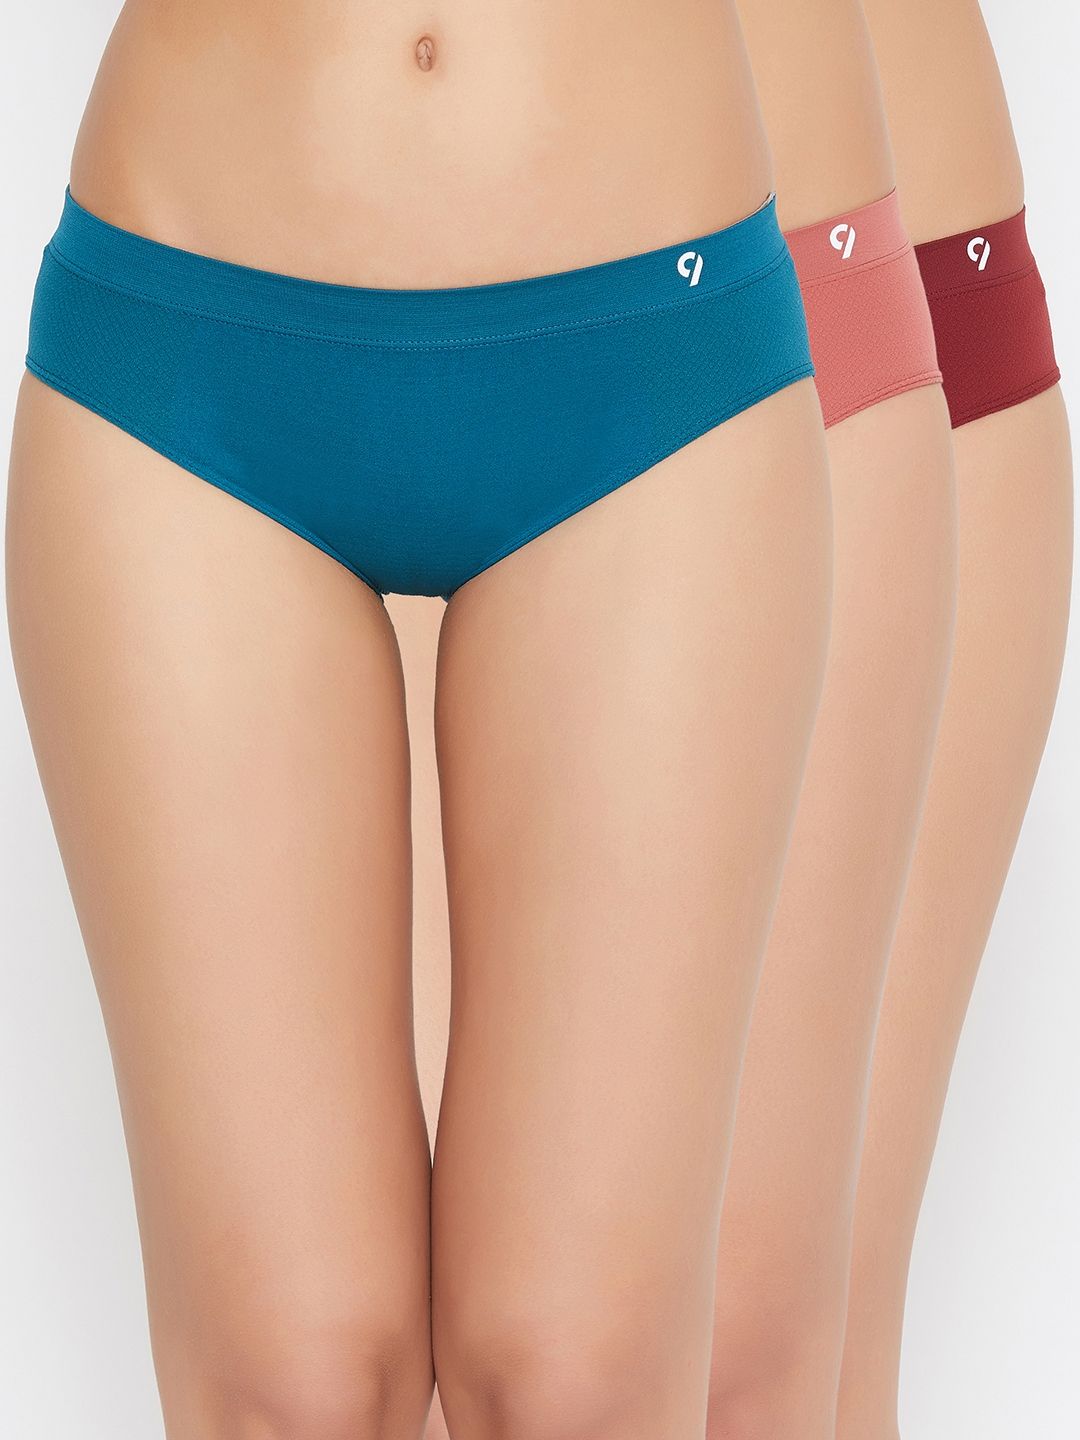 Colorful Comfort: Women's Multicolor Panty Pack Collection – C9